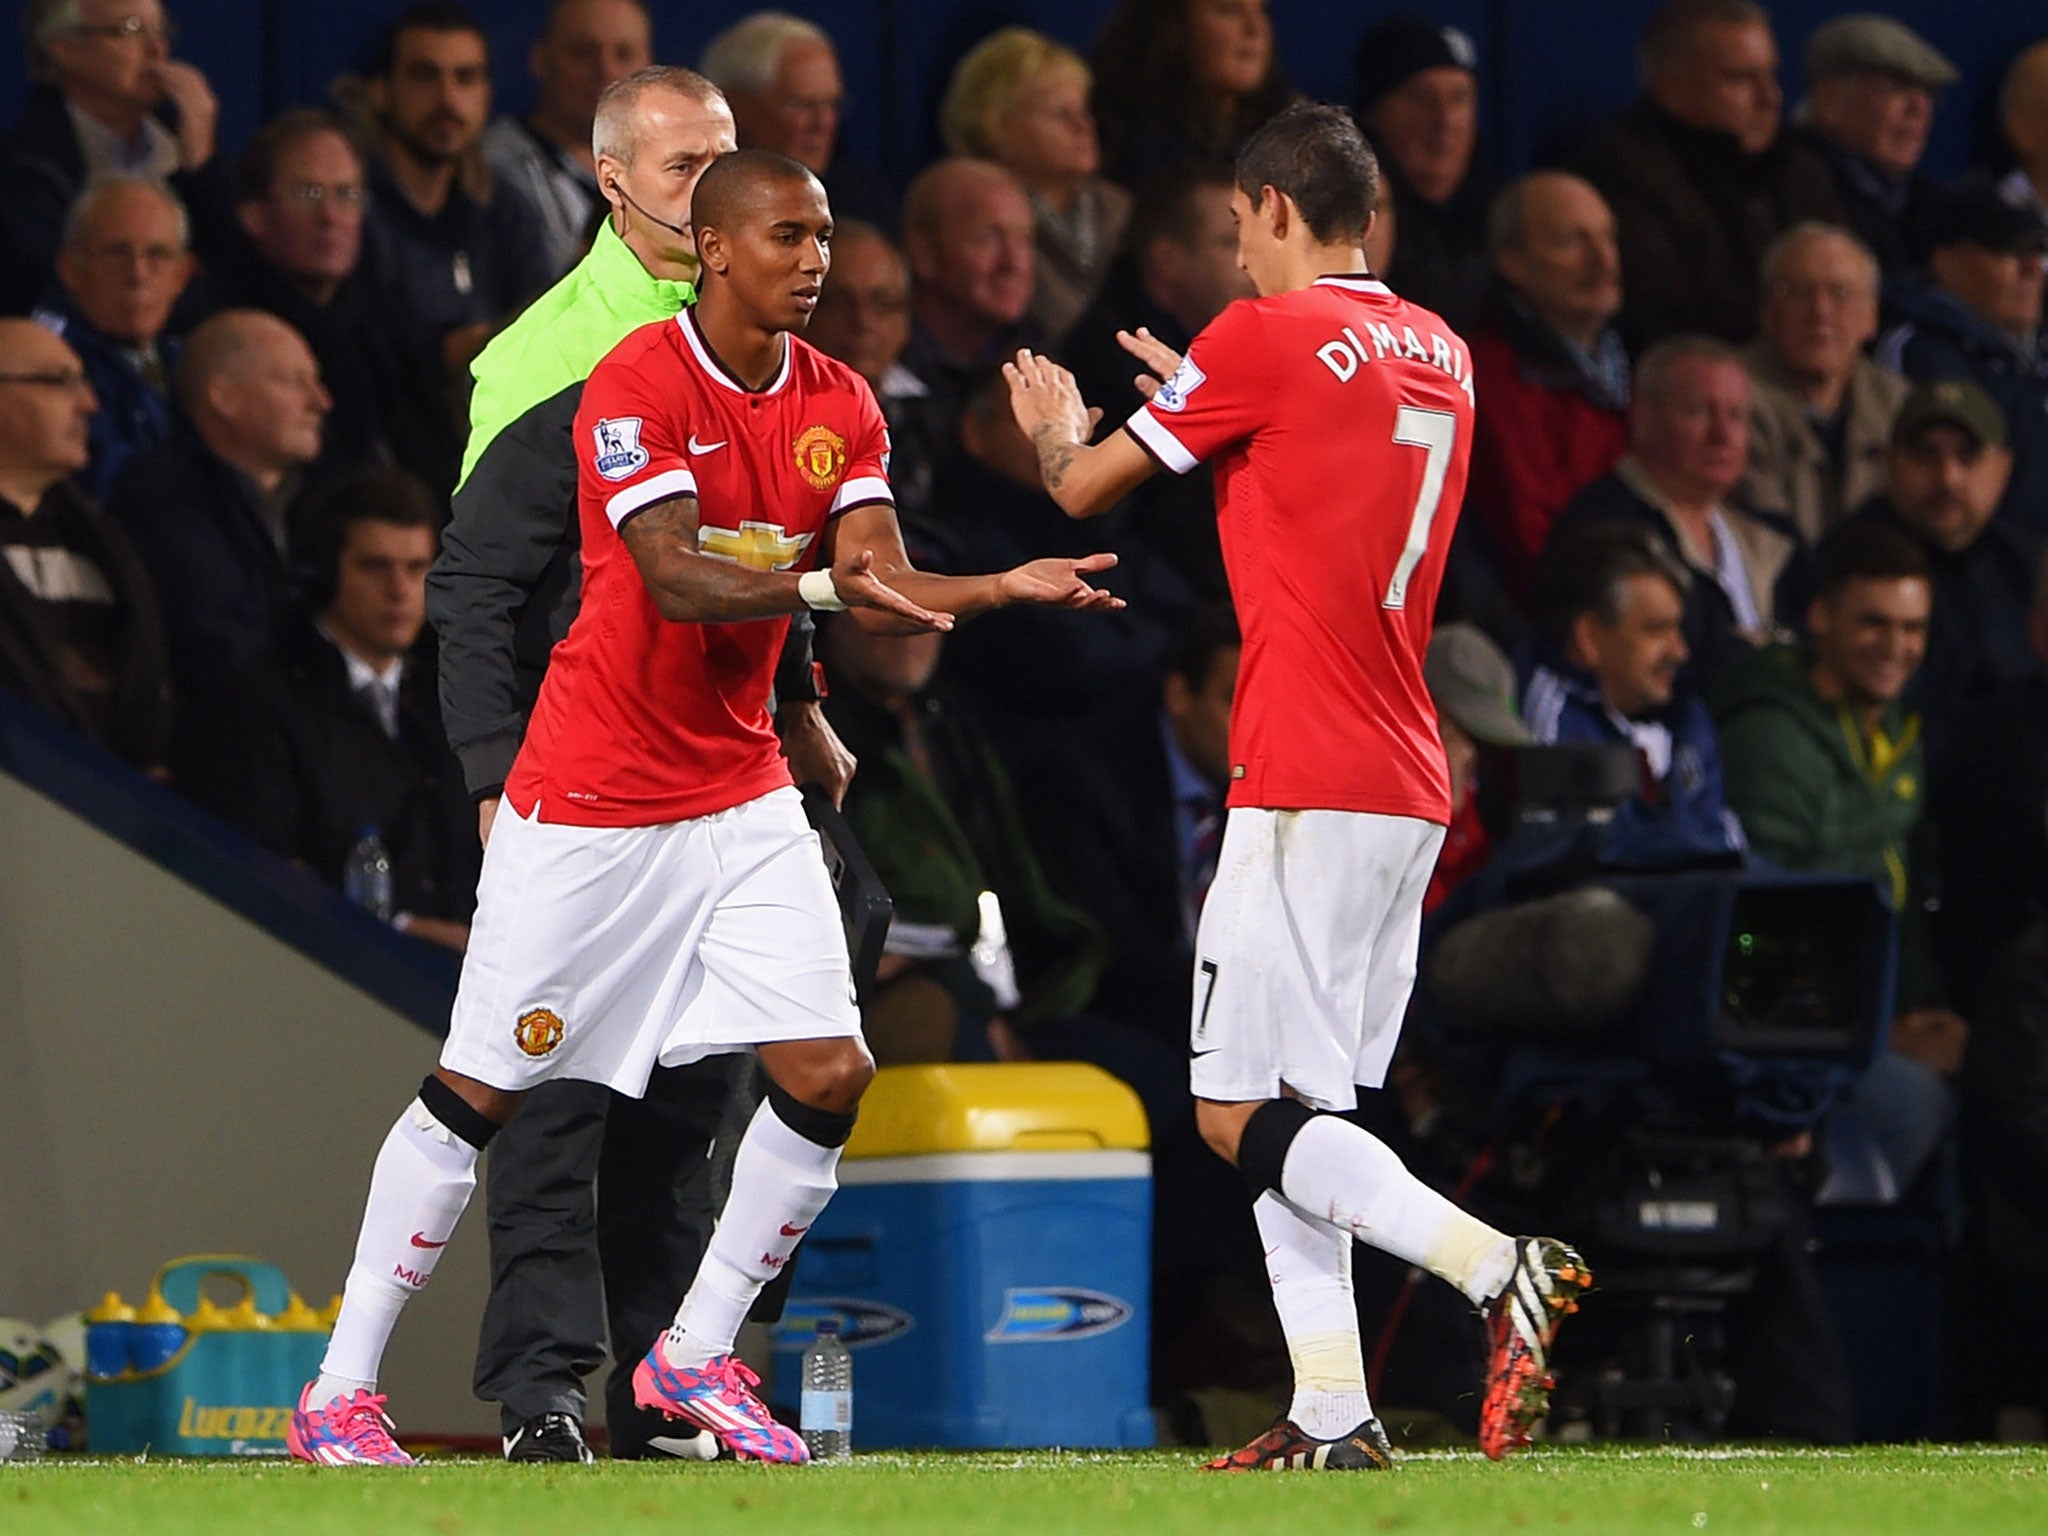 Angel Di Maria is substituted for Ashley Young